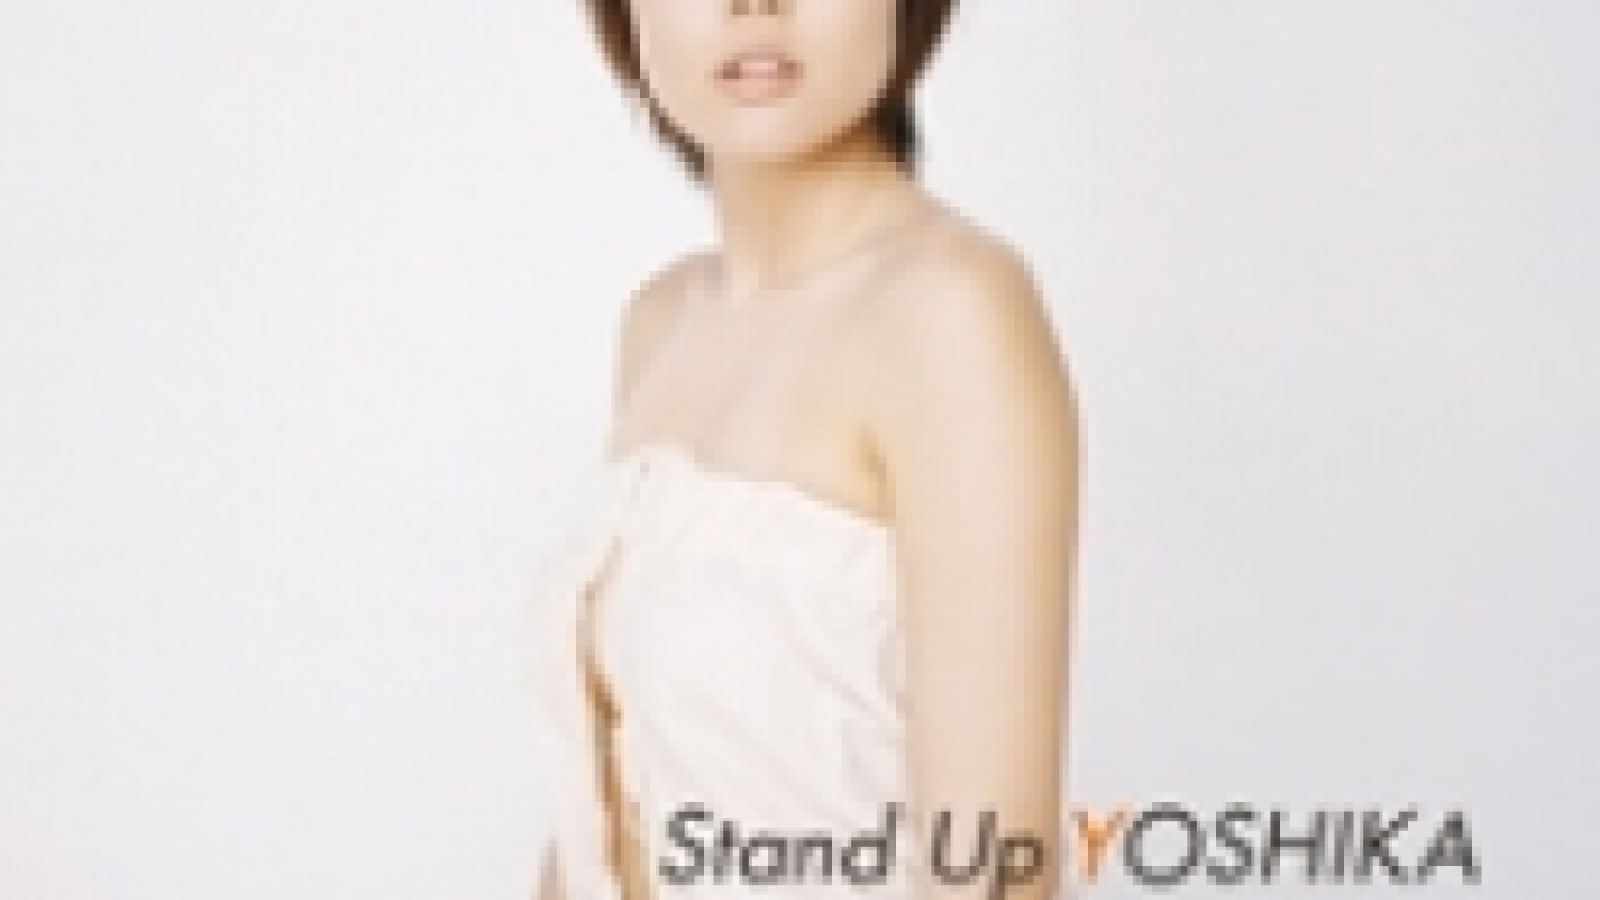 YOSHIKA - Stand Up © COMA-CHI. All rights reserved.